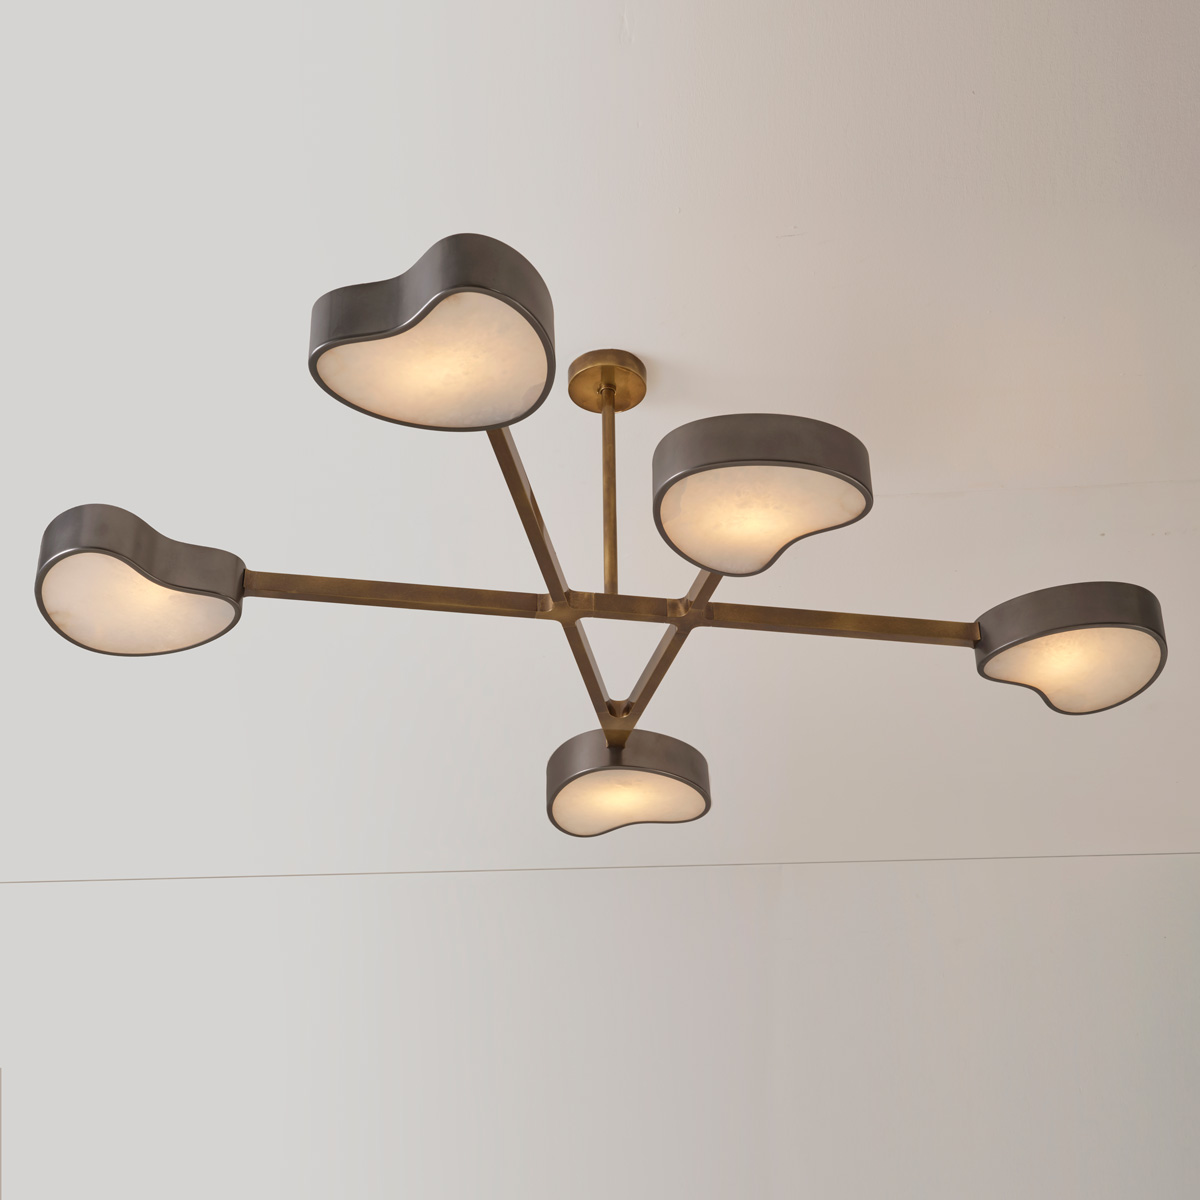 Cuore N5 ceiling light by Gaspare Asaro